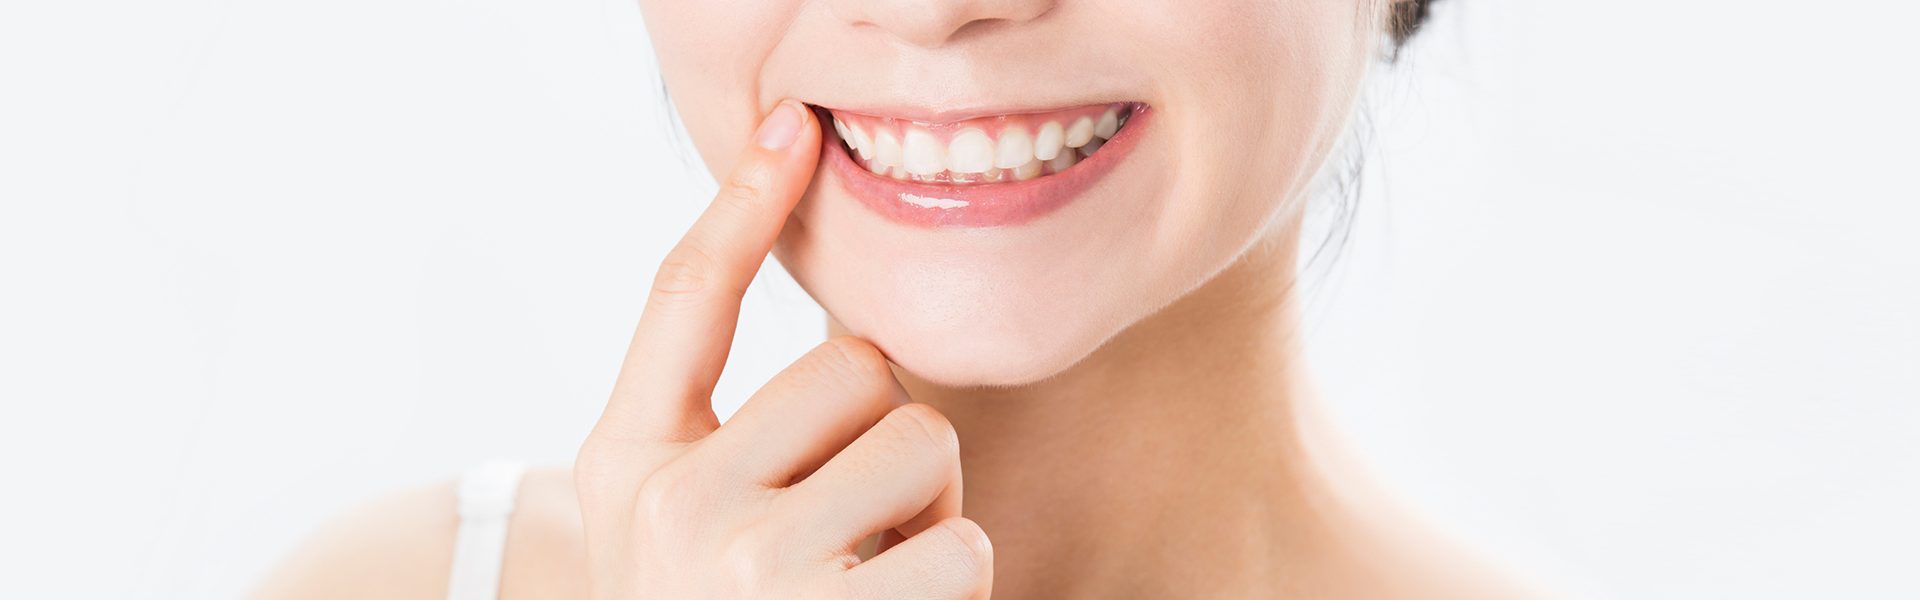 Straight Teeth Are Healthy Teeth: Why Alignment Matters